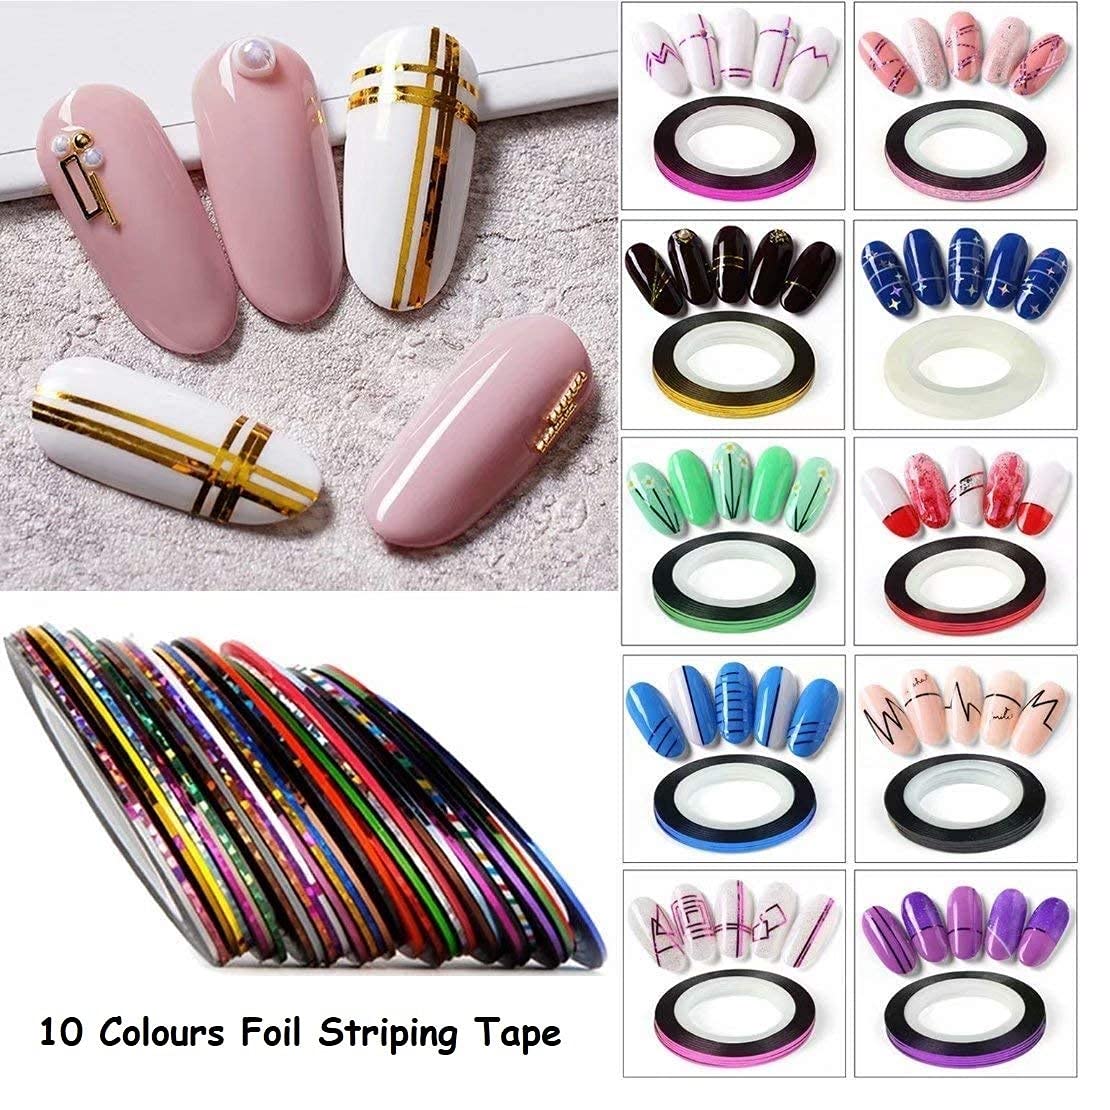 Acrylic Nail Art Practice Set Nail Liner Pen 180pcs 4colors Nail Wipes  Lines Drawing Painting Template Learning Book Easy To Clean Can Be Reused Manicure  Tools … | Acrylic nail art, Nail